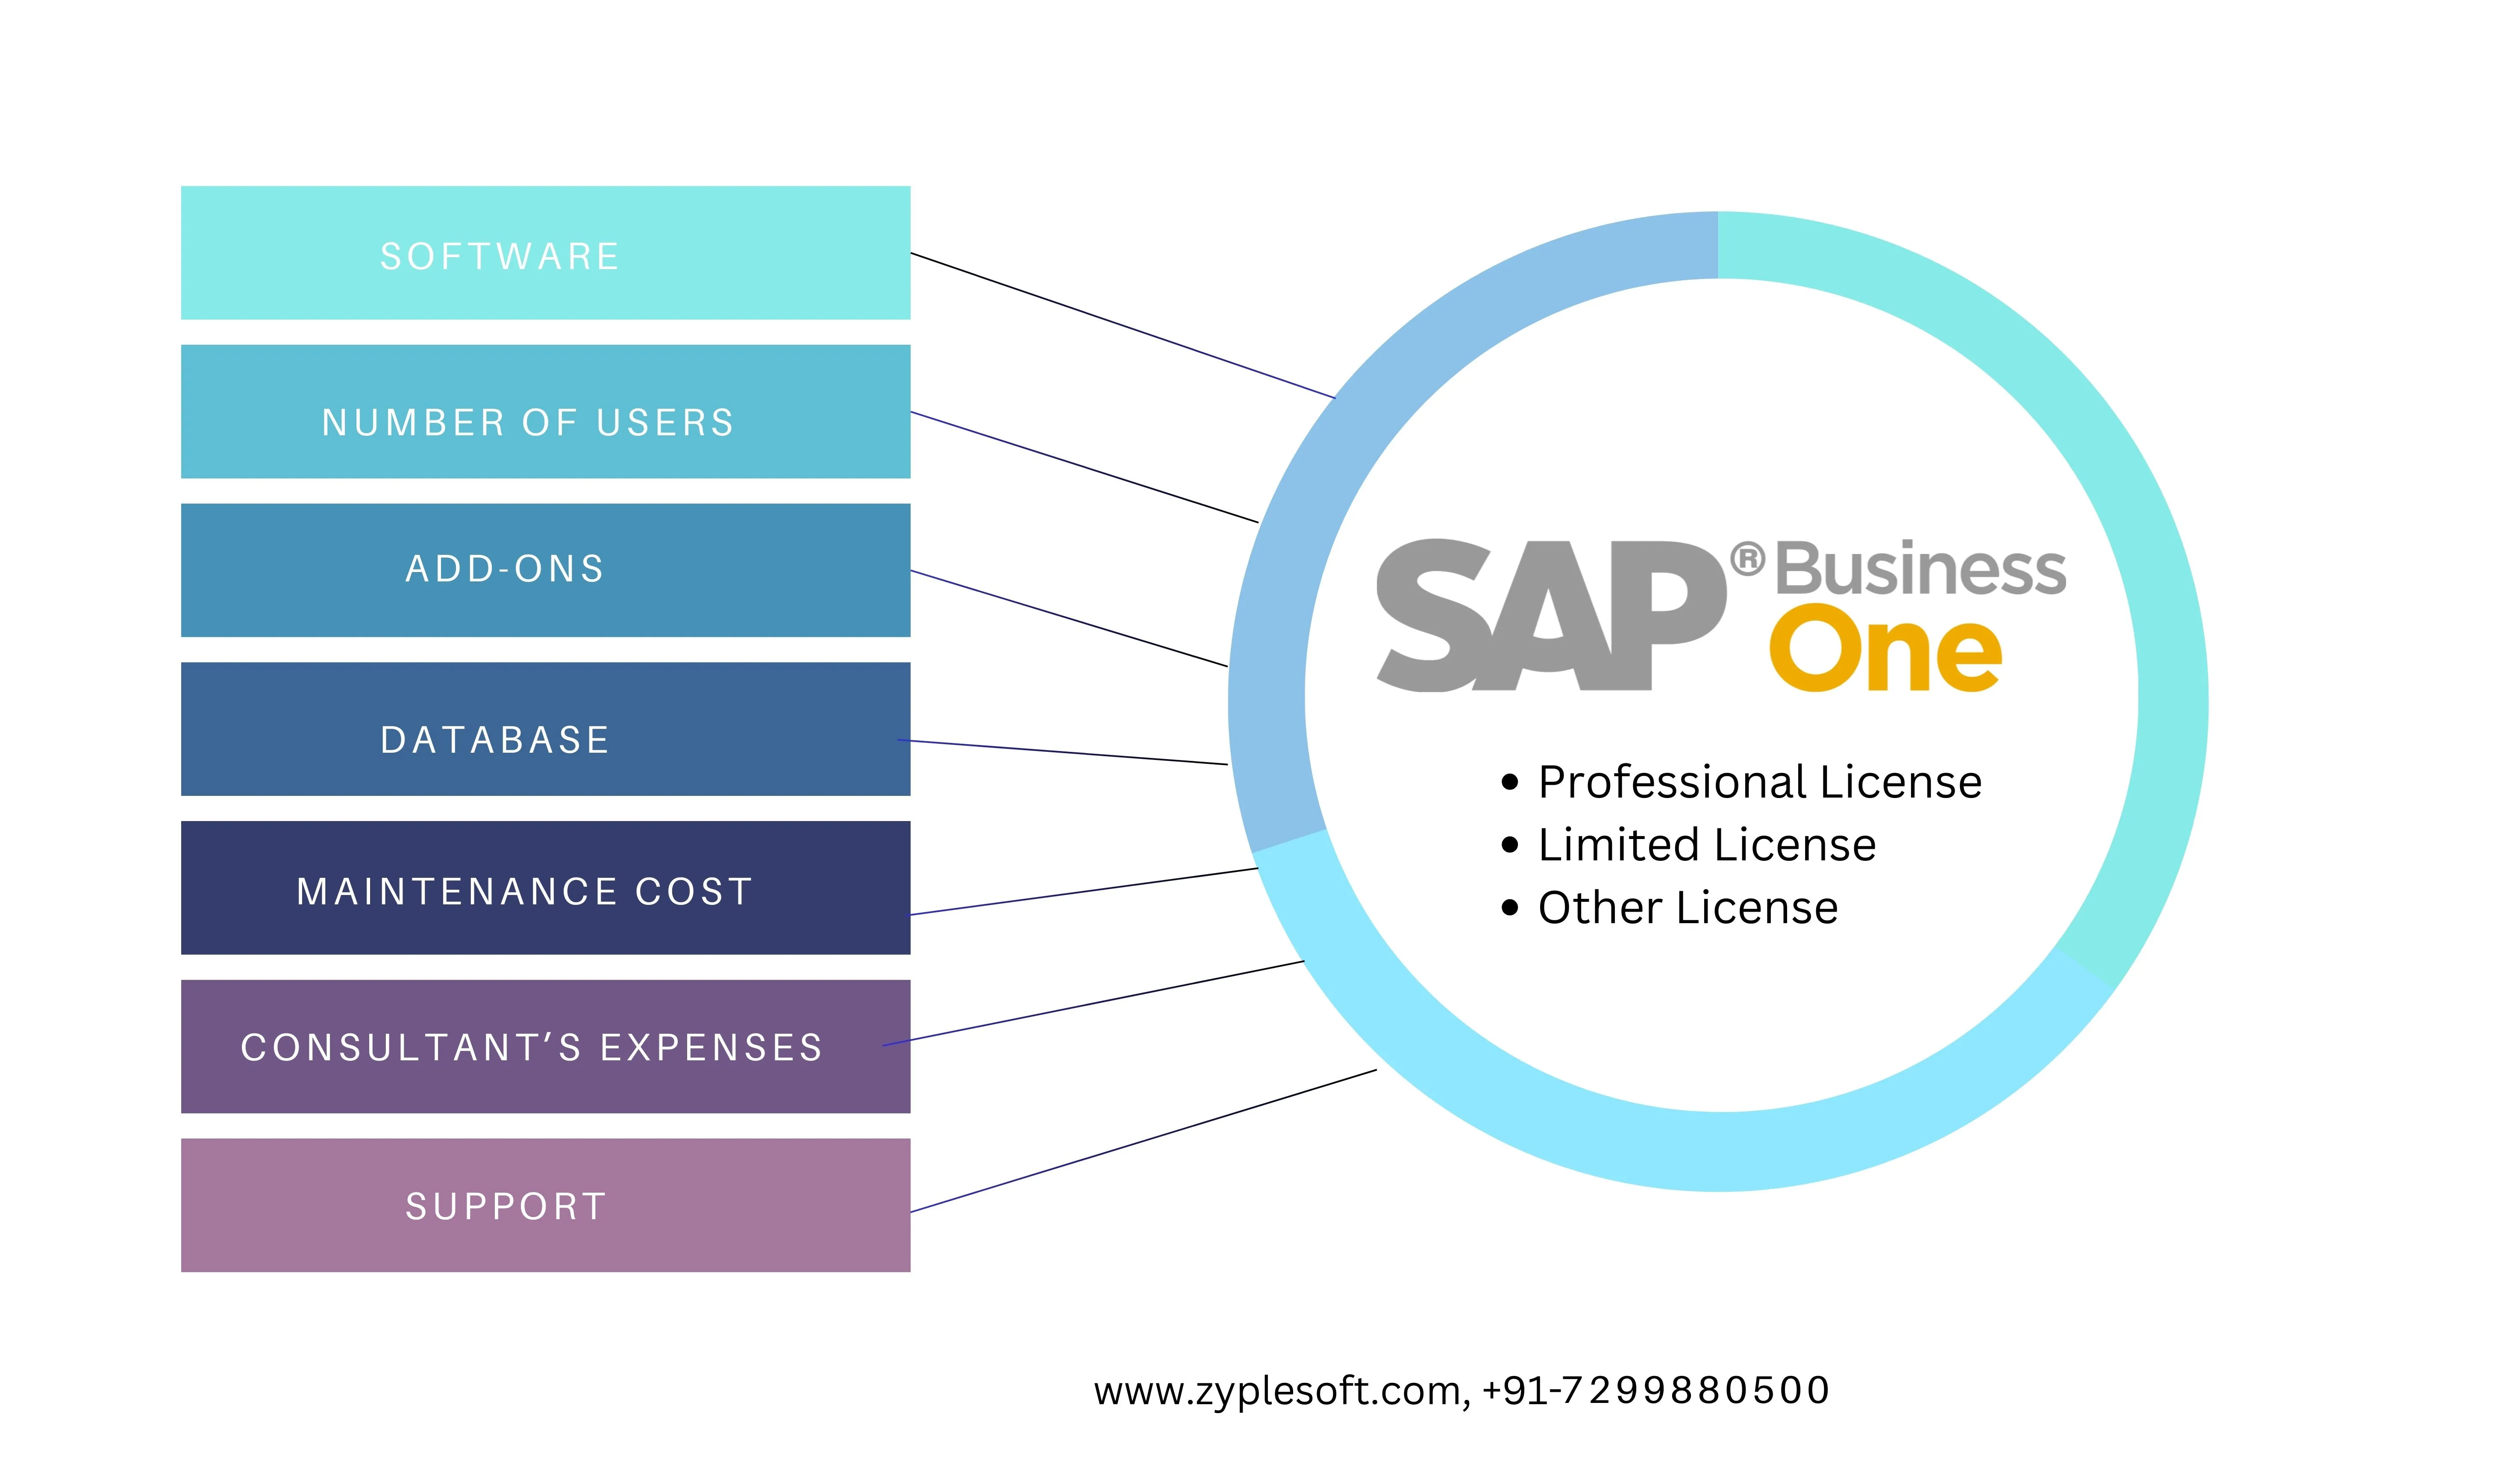 SAP Business One license price or cost